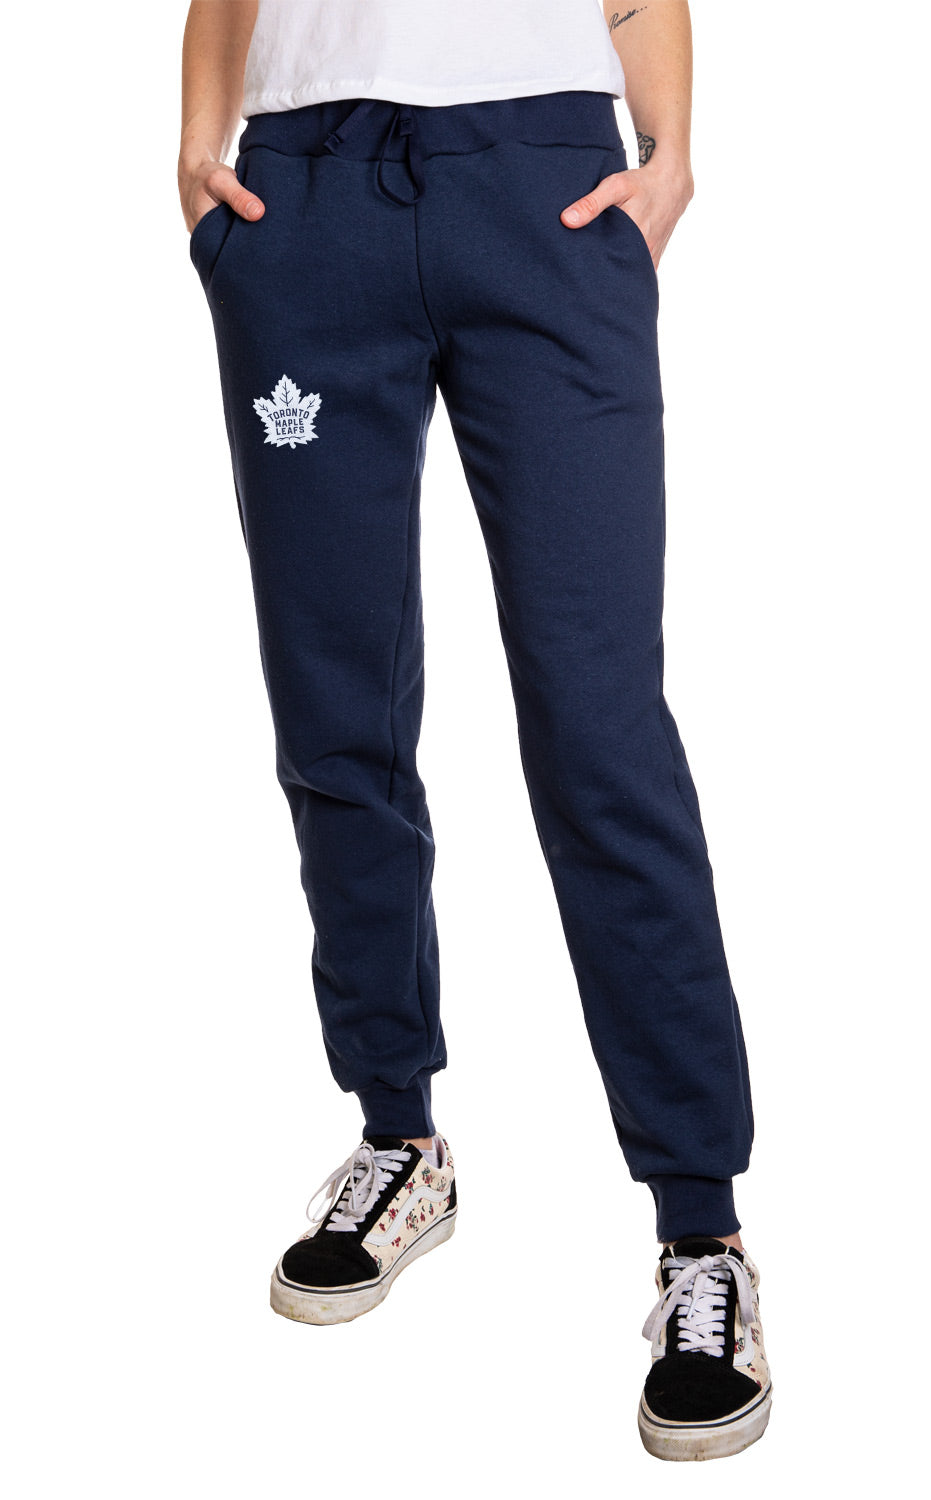 Toronto Maple Leafs Ladies Cuffed Jogger Style Track Pants